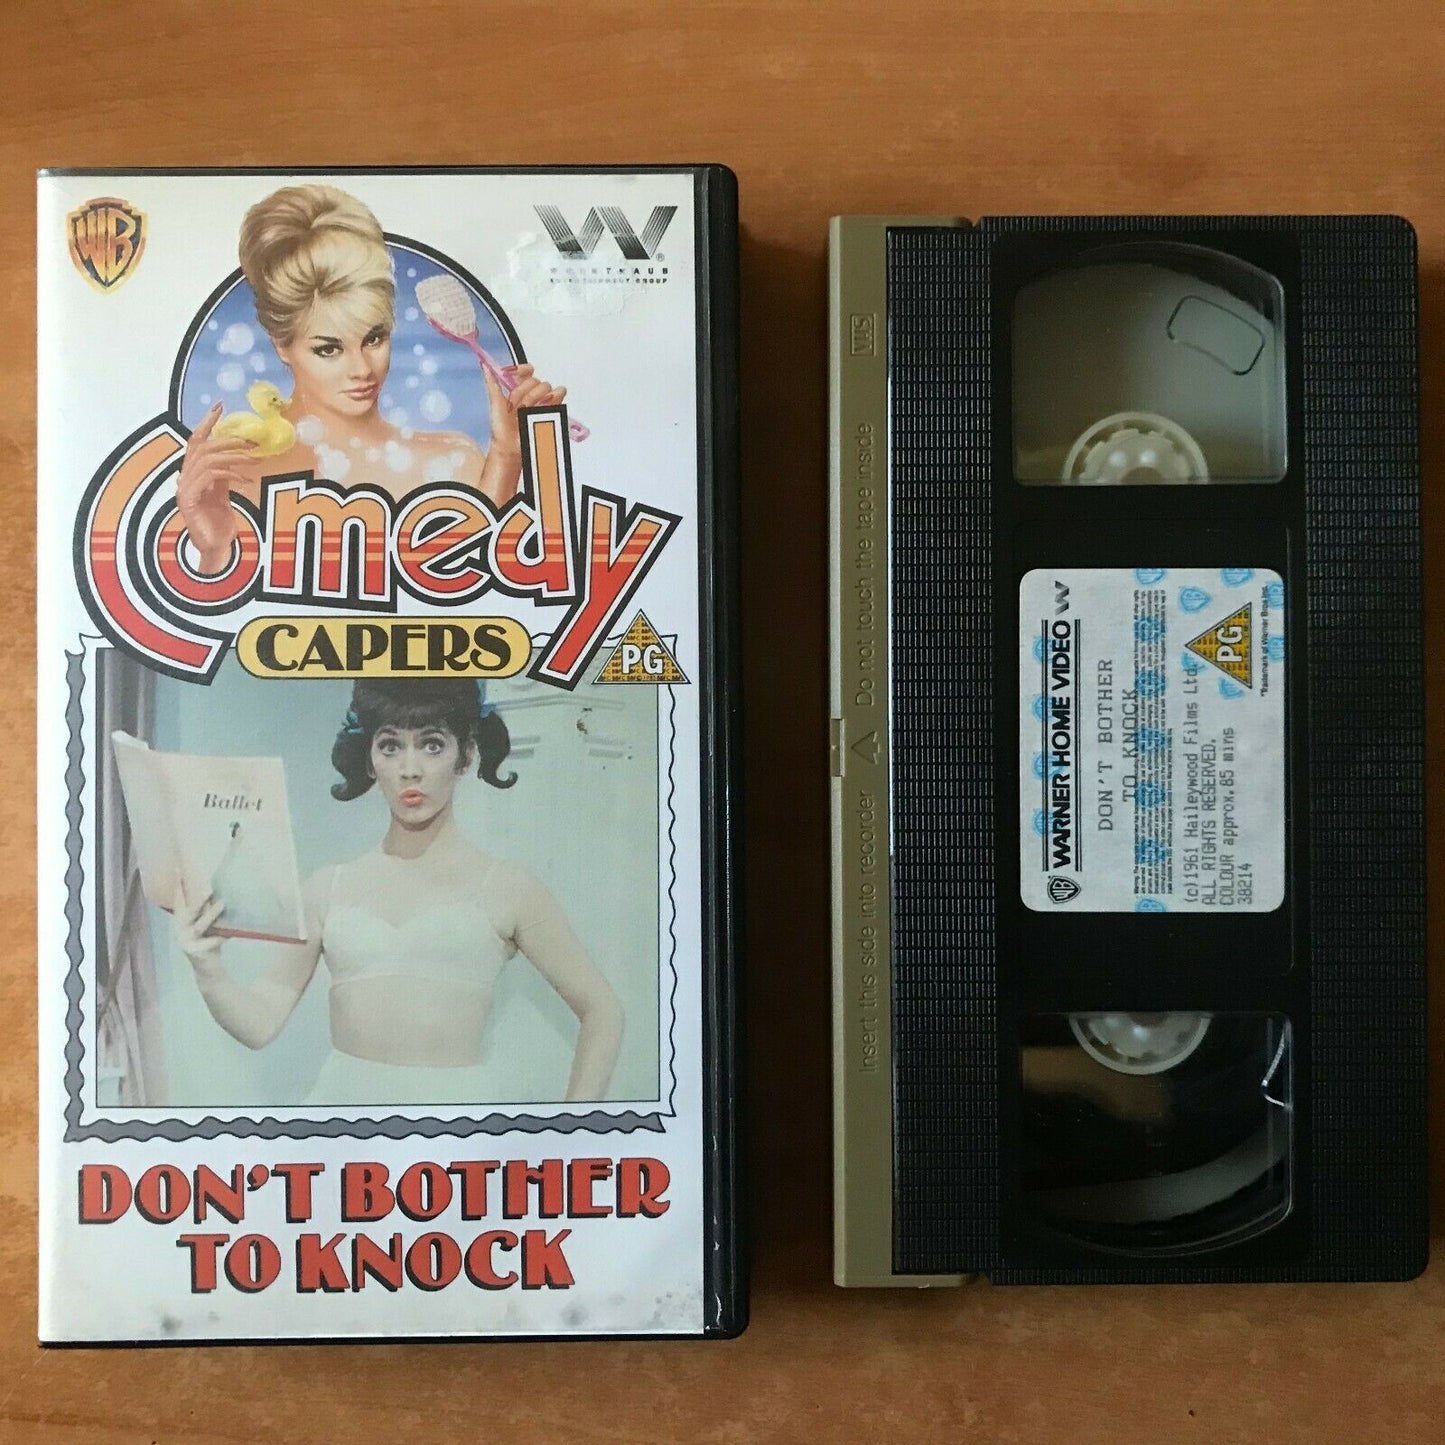 Don't Bother To Knock (1961); [Comedy Capers] Richard Todd / Elke Sommer - VHS-